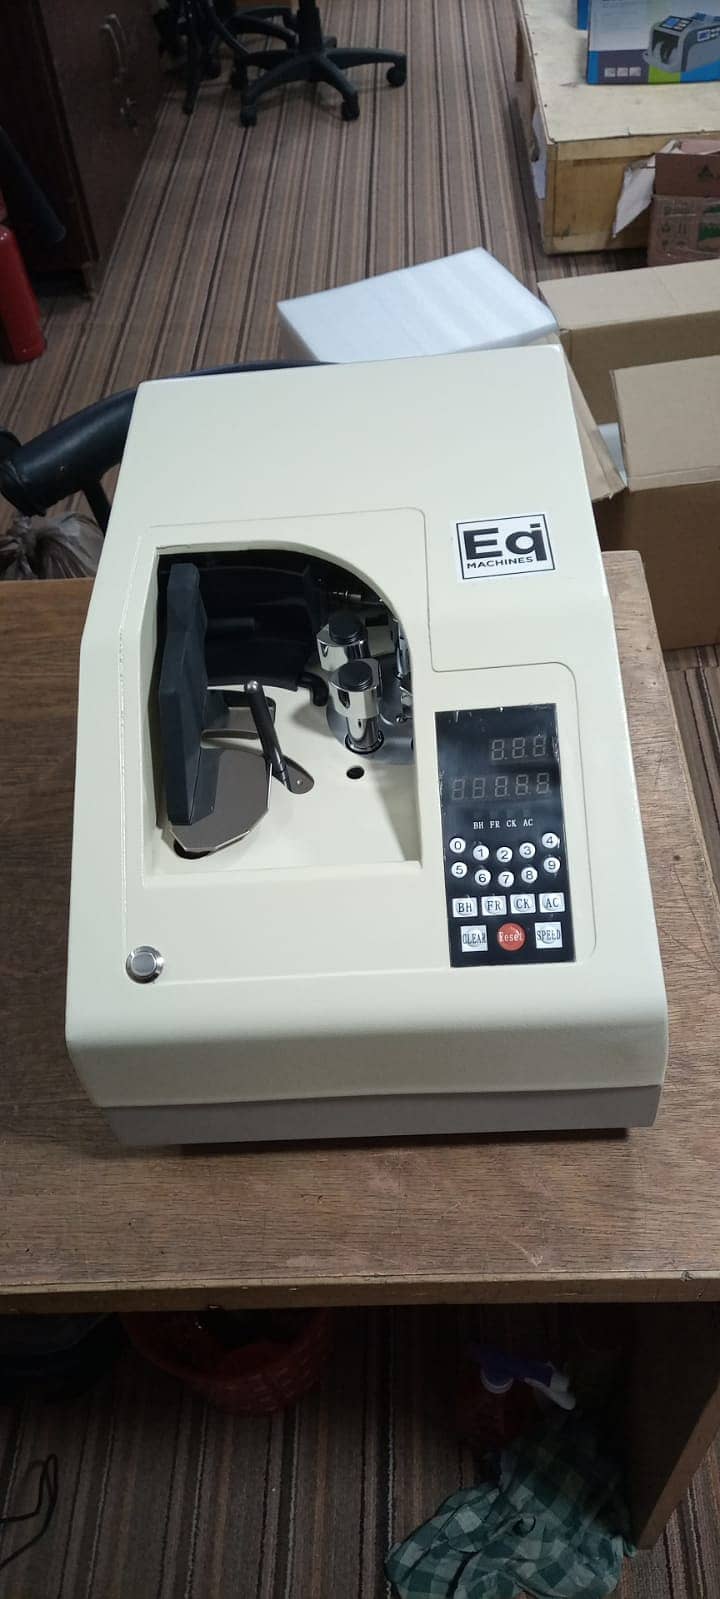 cash counting machine price in karachi starting from Rs. 16500 8